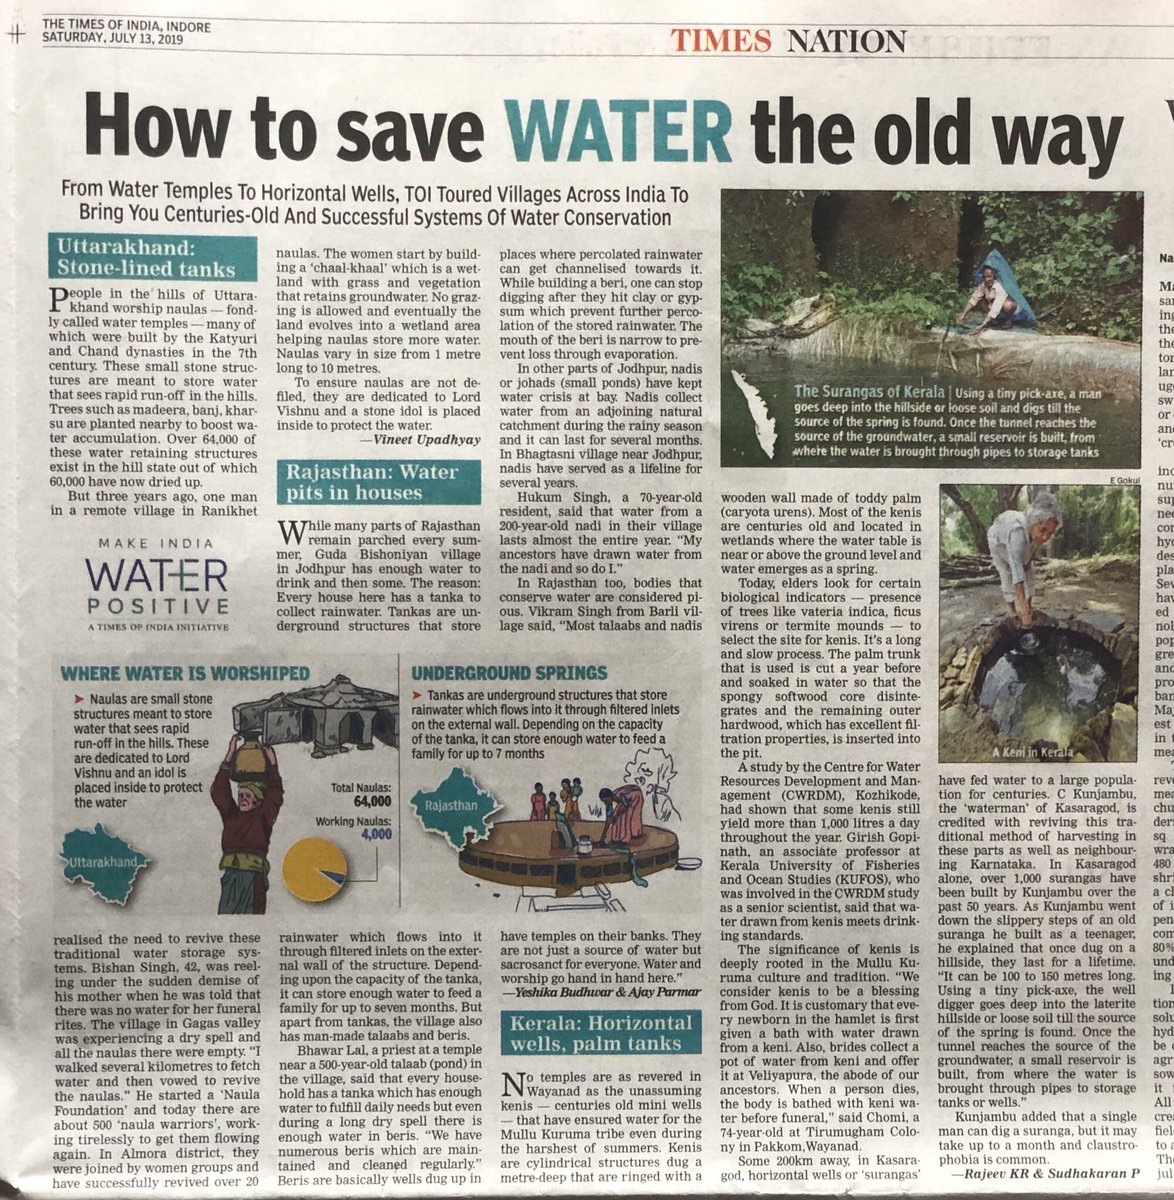 Collection of #Traditional
Local #VillageIdeas Of
#WaterConservation
& Sharing it With All
Would #Help #Humanity
To #SaveWater💧 For #Future
#Uttarakhand #WaterTemples
#NaulaFoundation
#Rajasthan #Tanka & #Beries
#Kerala 's #Kenis are 
#InspiringIdeas @gssjodhpur